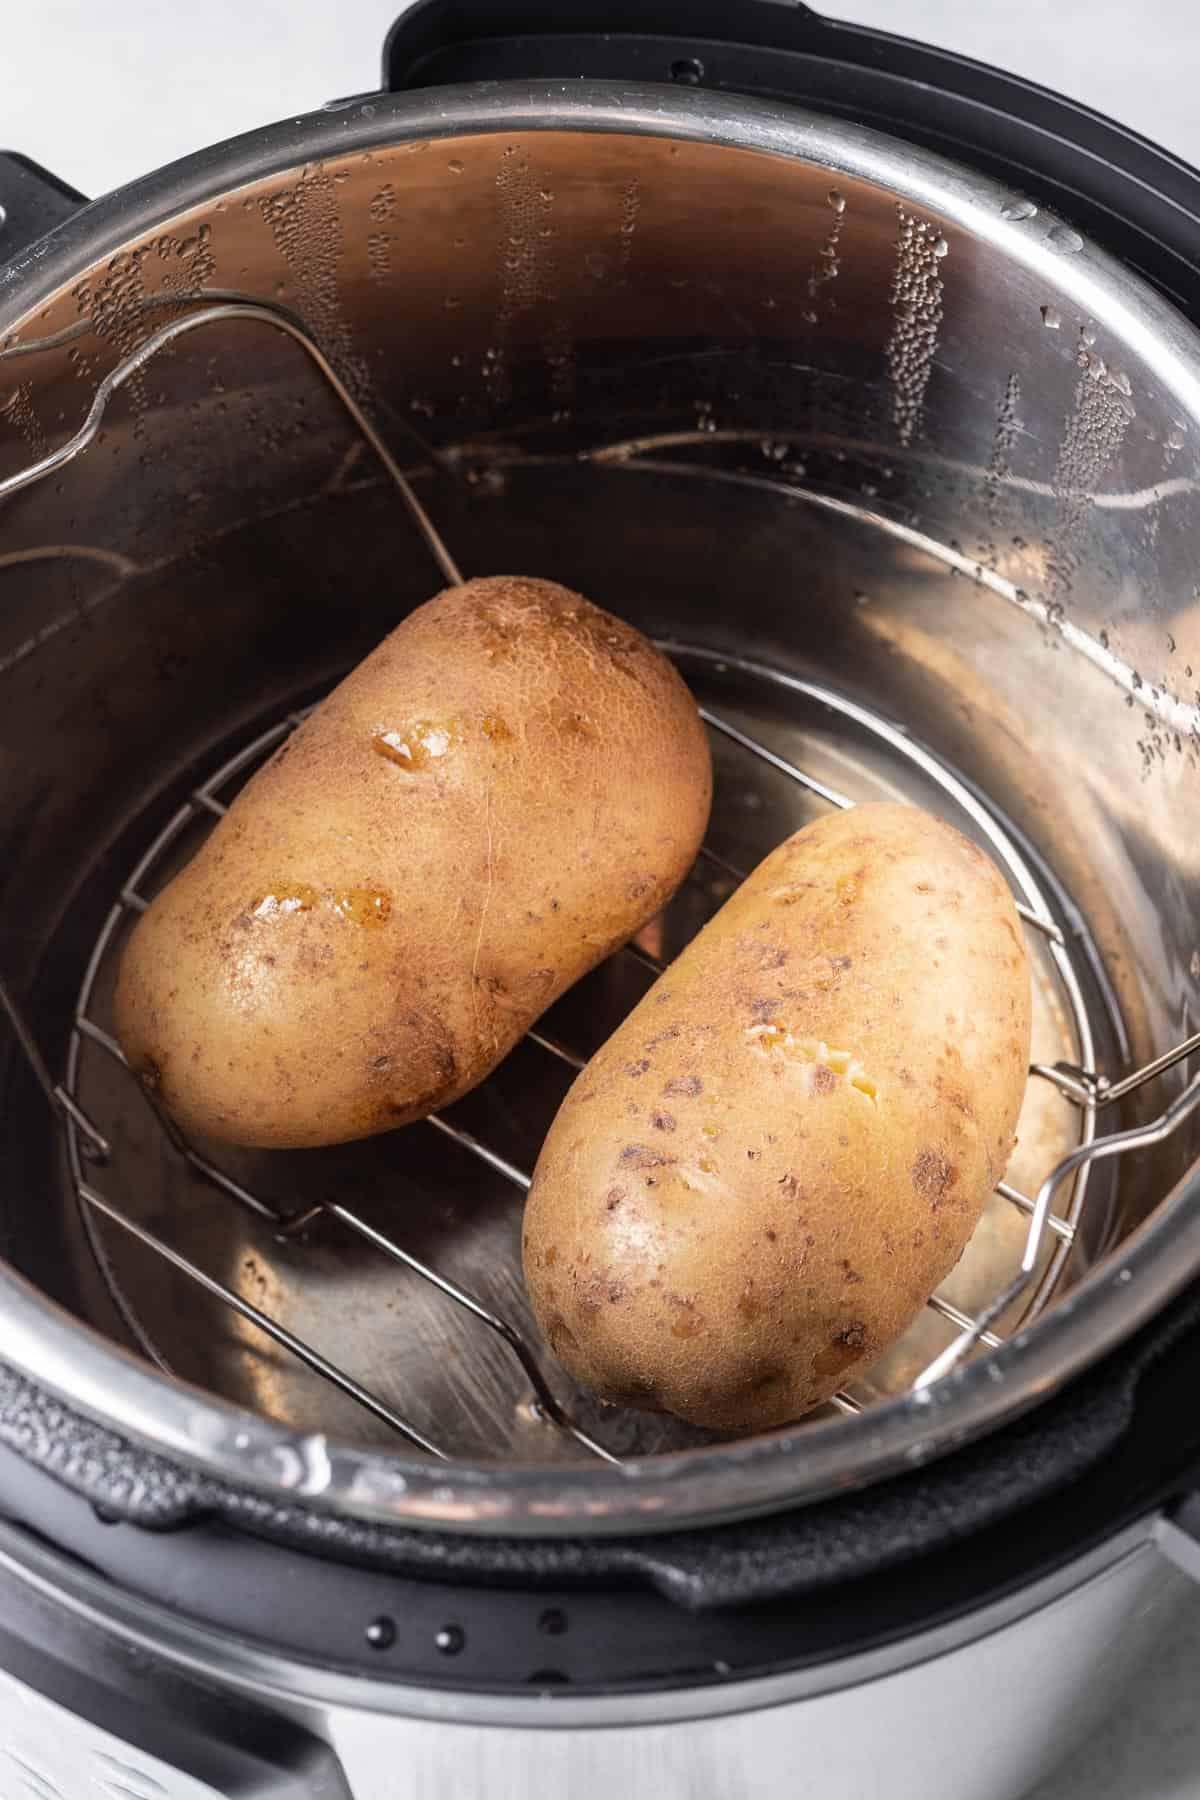 Russet potatoes steamed in an instant pot.